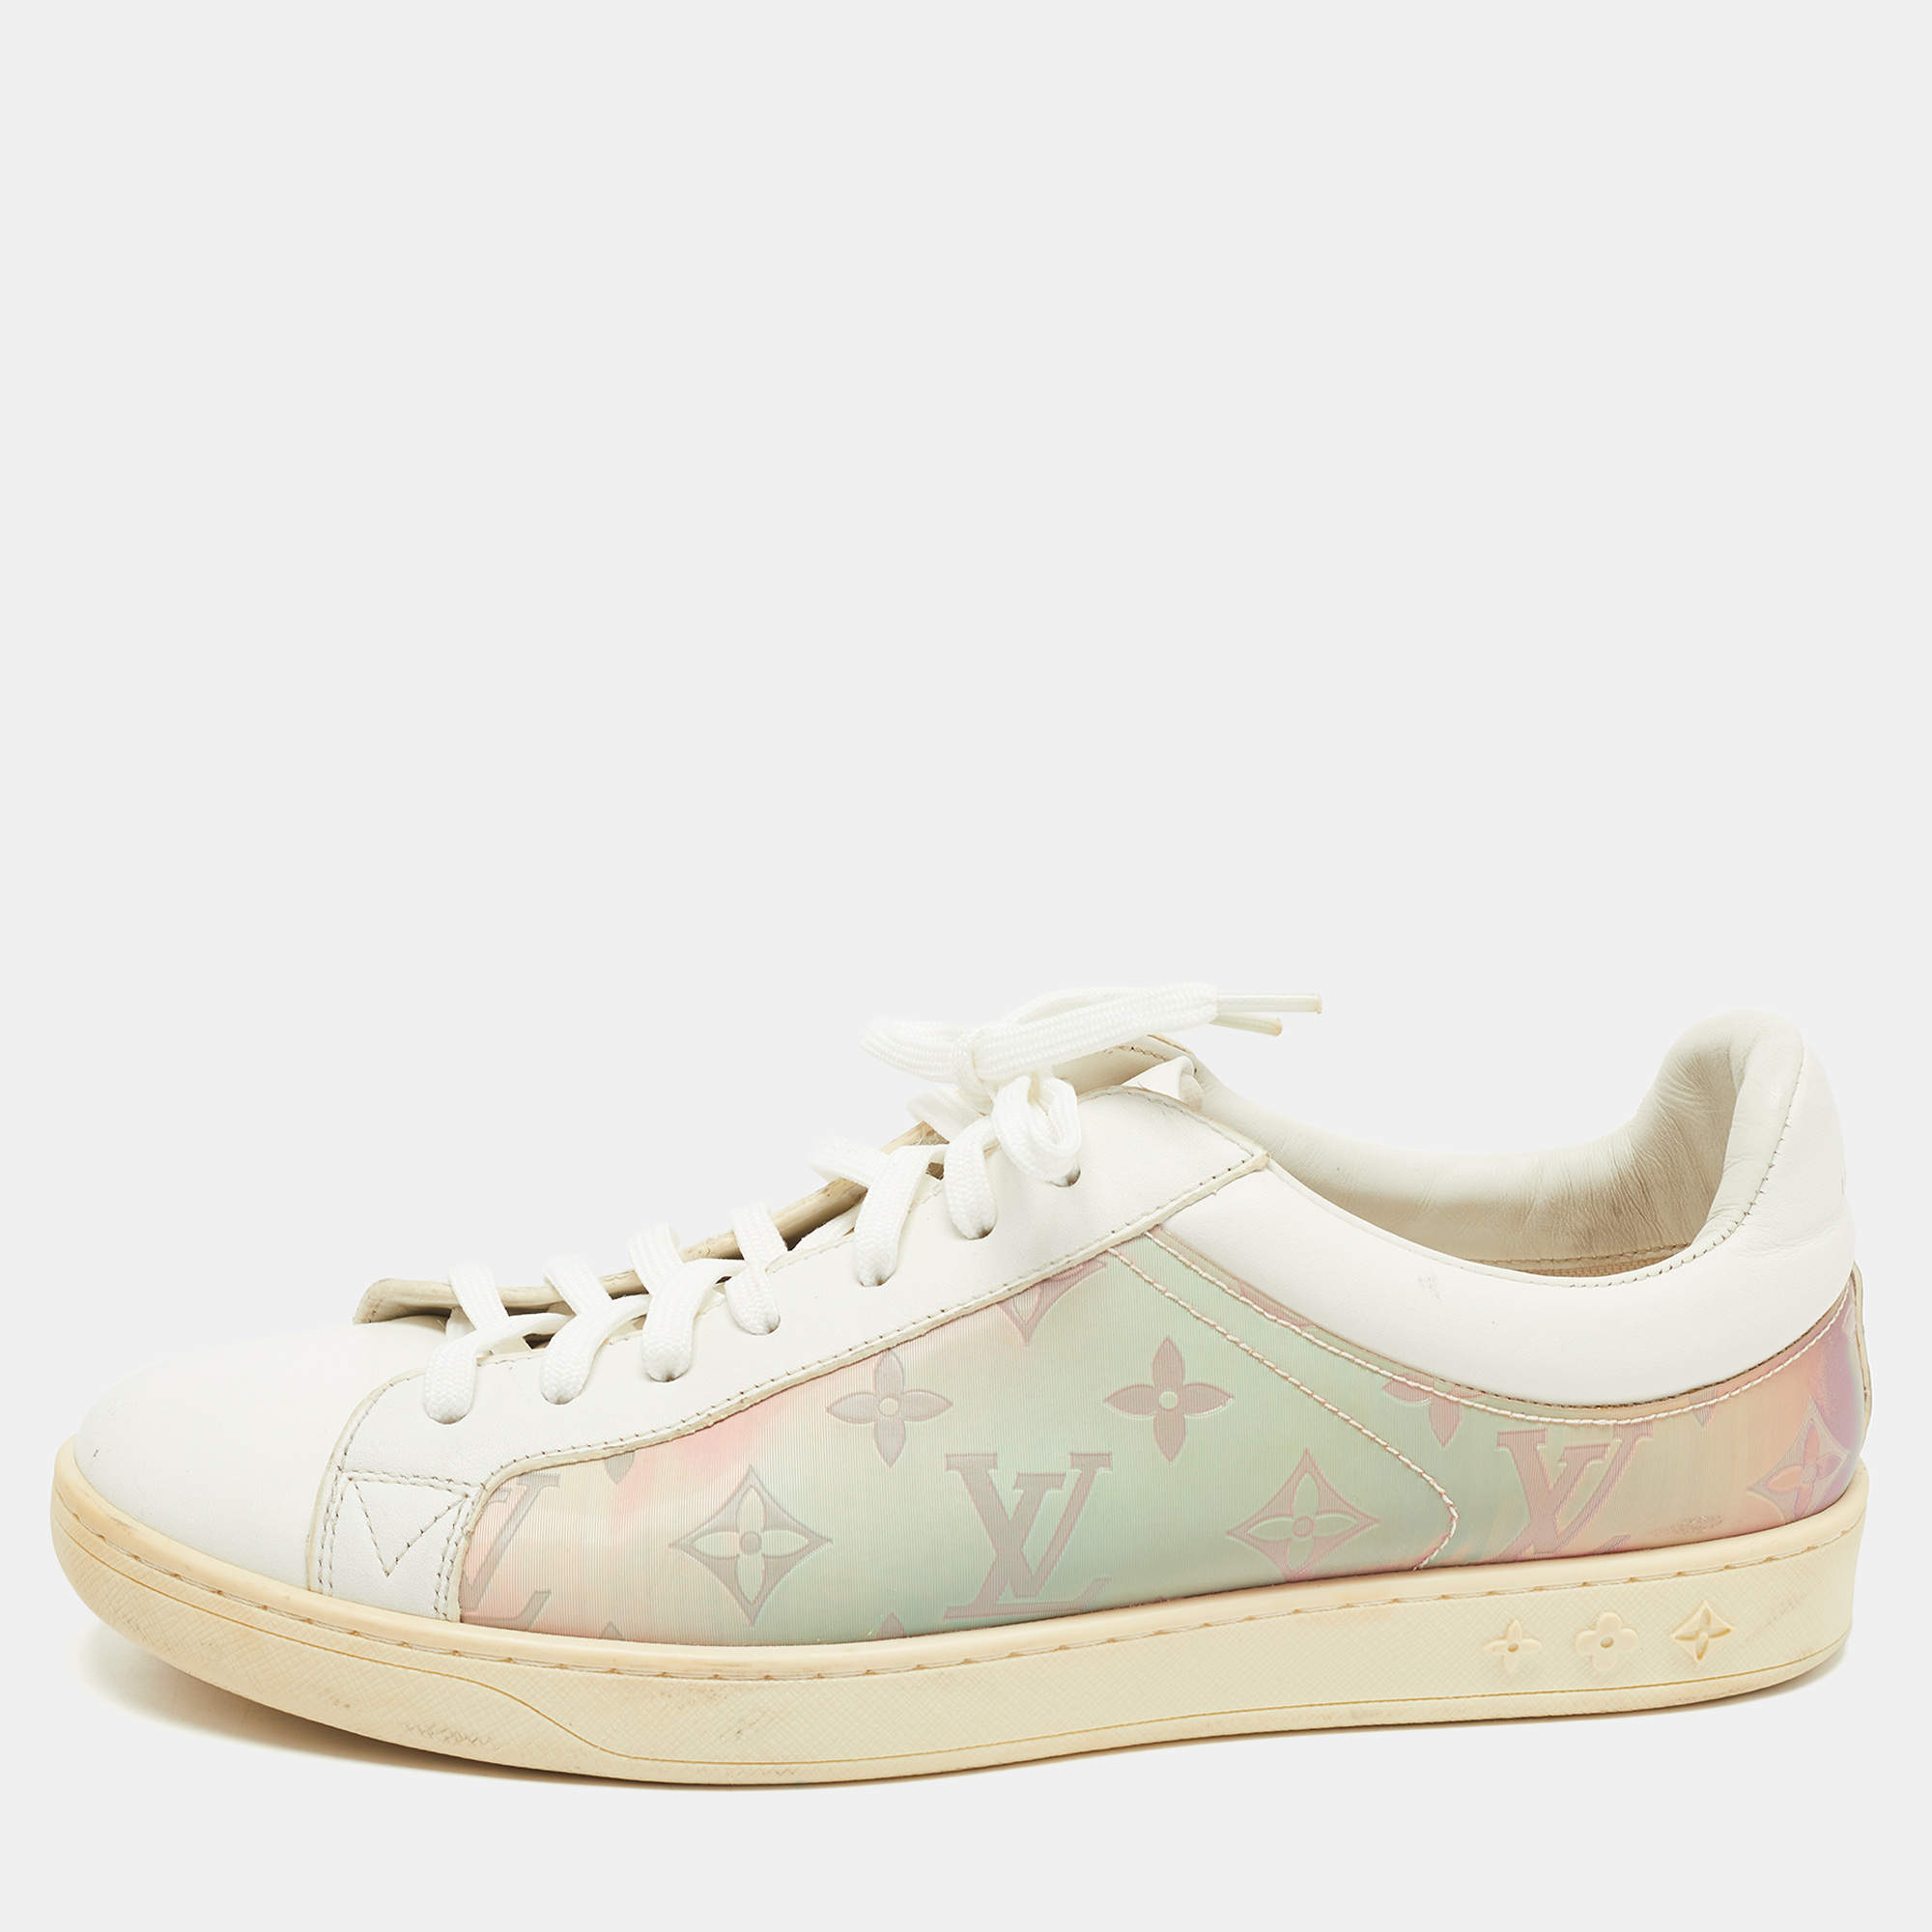 Louis Vuitton LV Unisex Luxembourg Sneaker in White Grained Calf